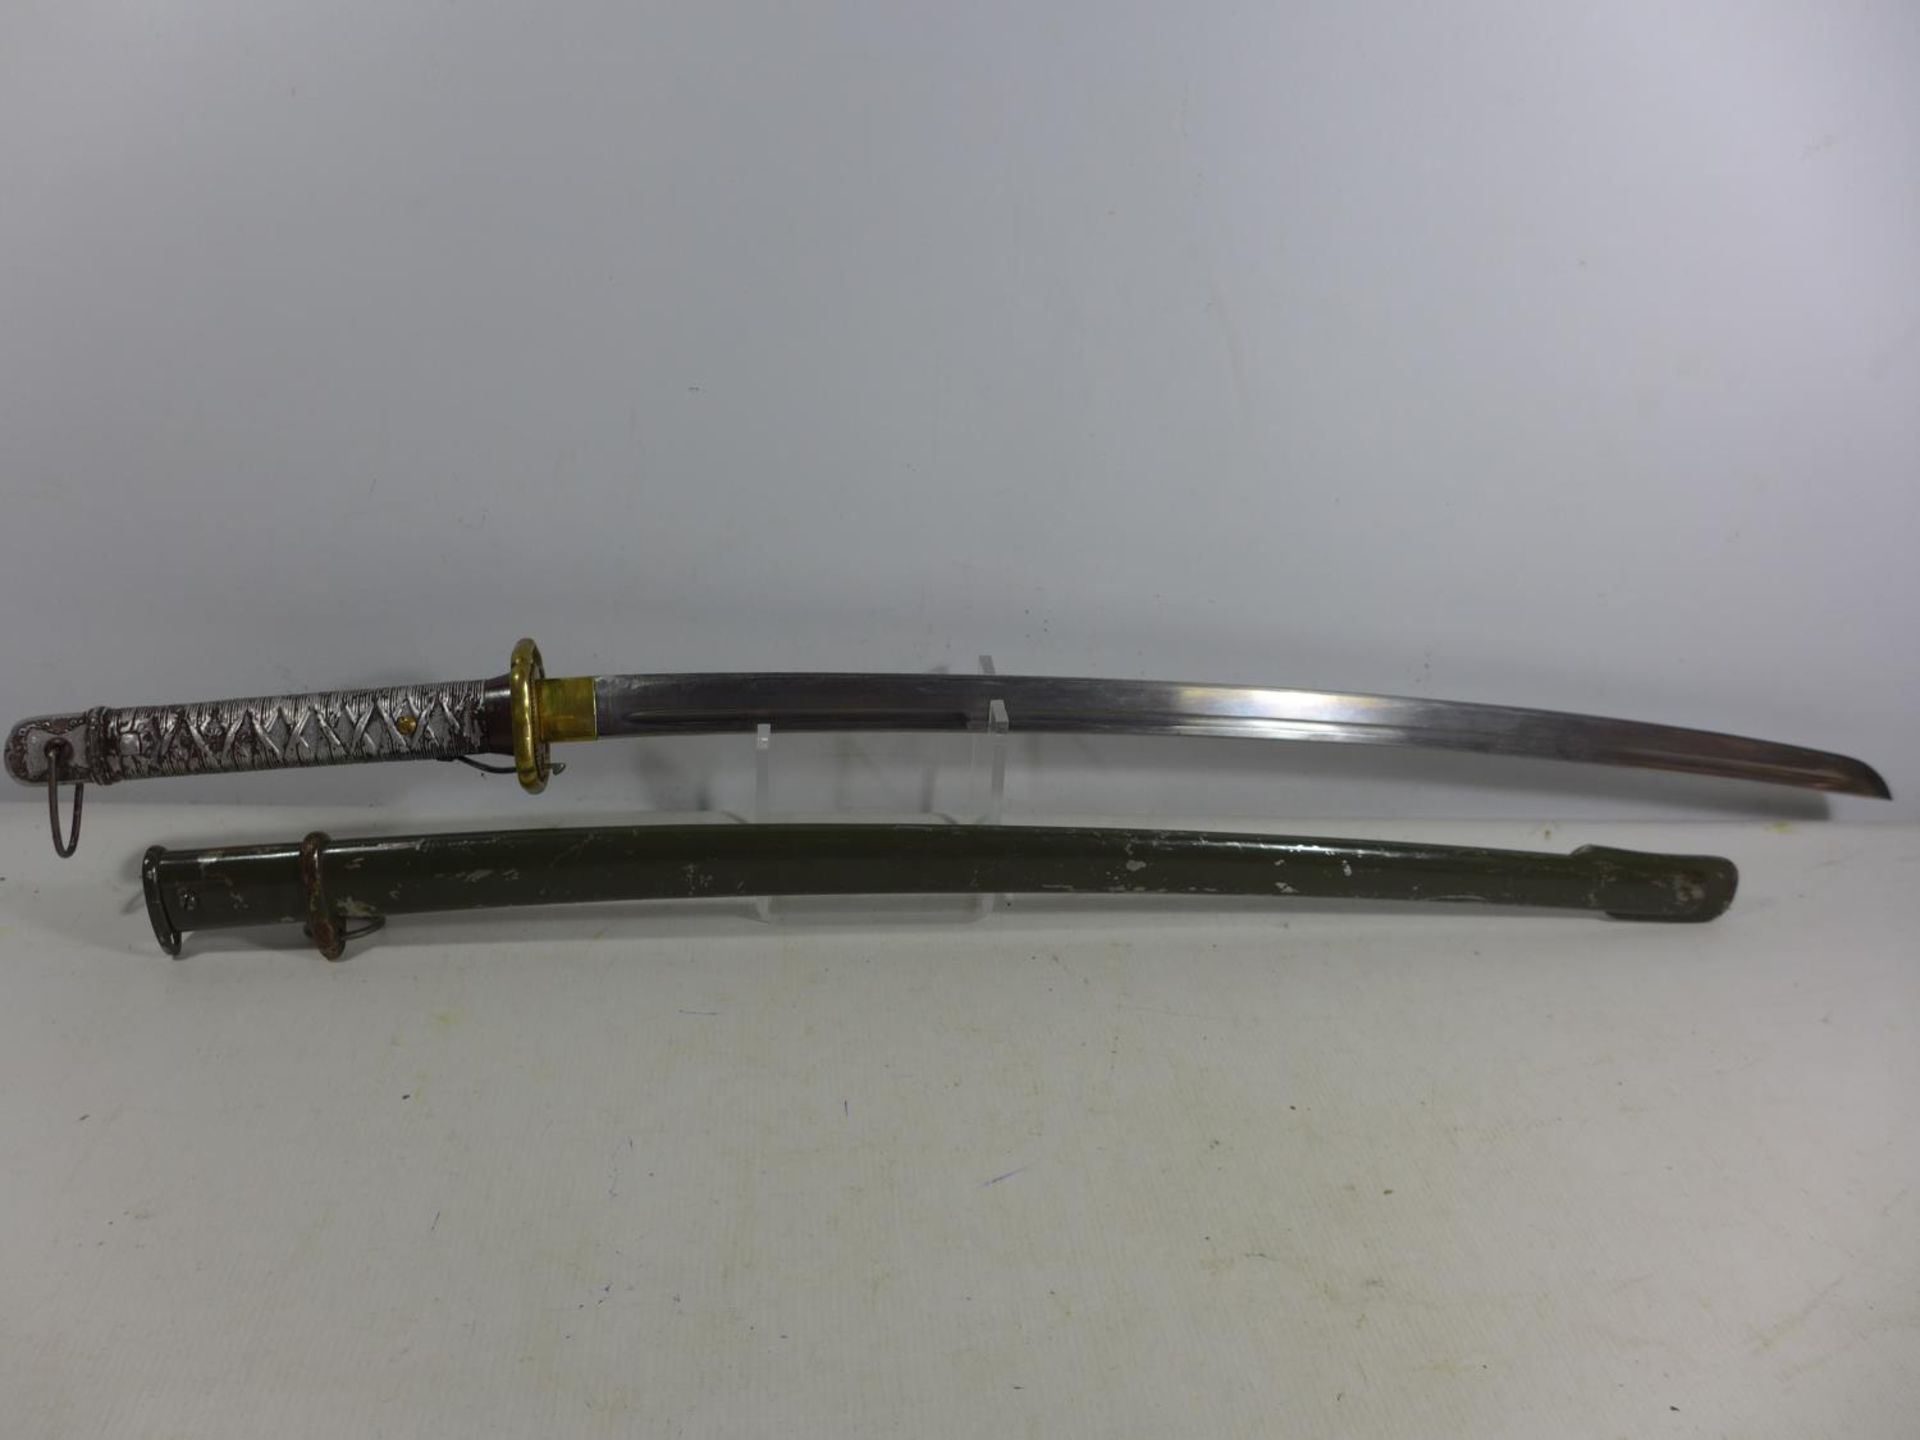 A MID 20TH CENTURY JAPANSES NCO'S SWORD AND SCABBARD, 70CM BLADE, LENGTH 96CM